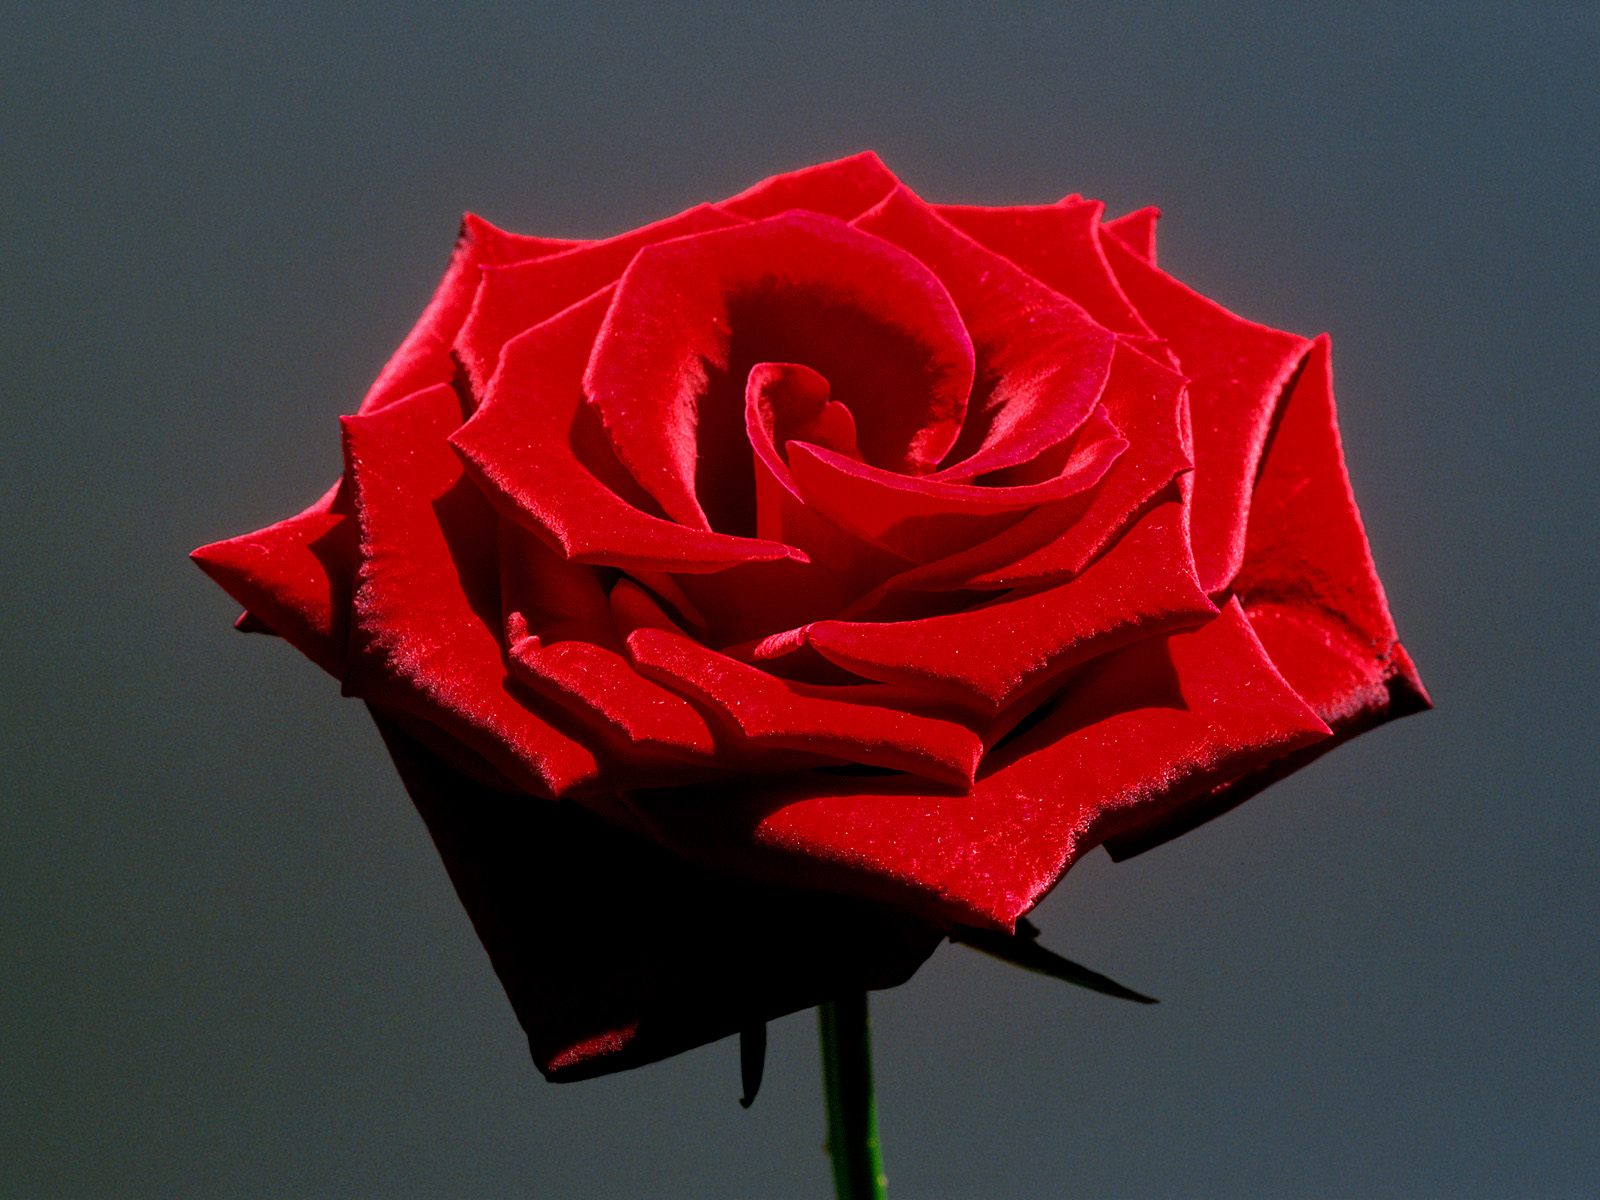  HQ Red Rose Wallpaper   HQ Wallpapers 1600x1200